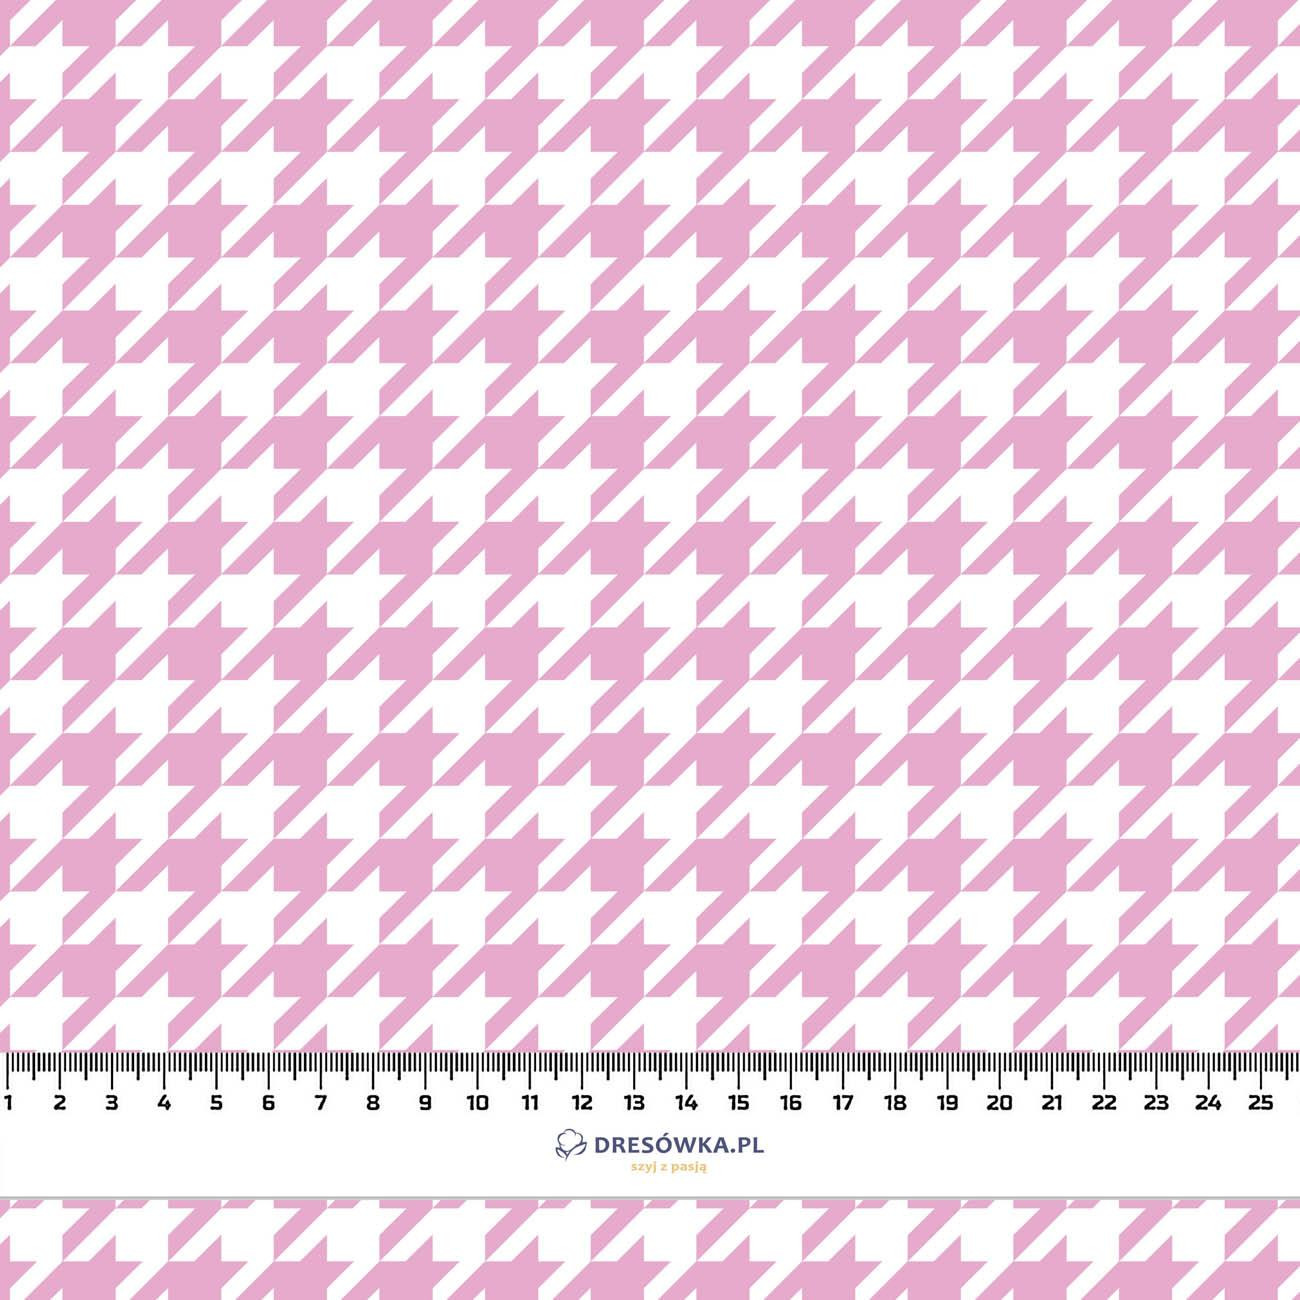 PINK HOUNDSTOOTH / WHITE - looped knit fabric